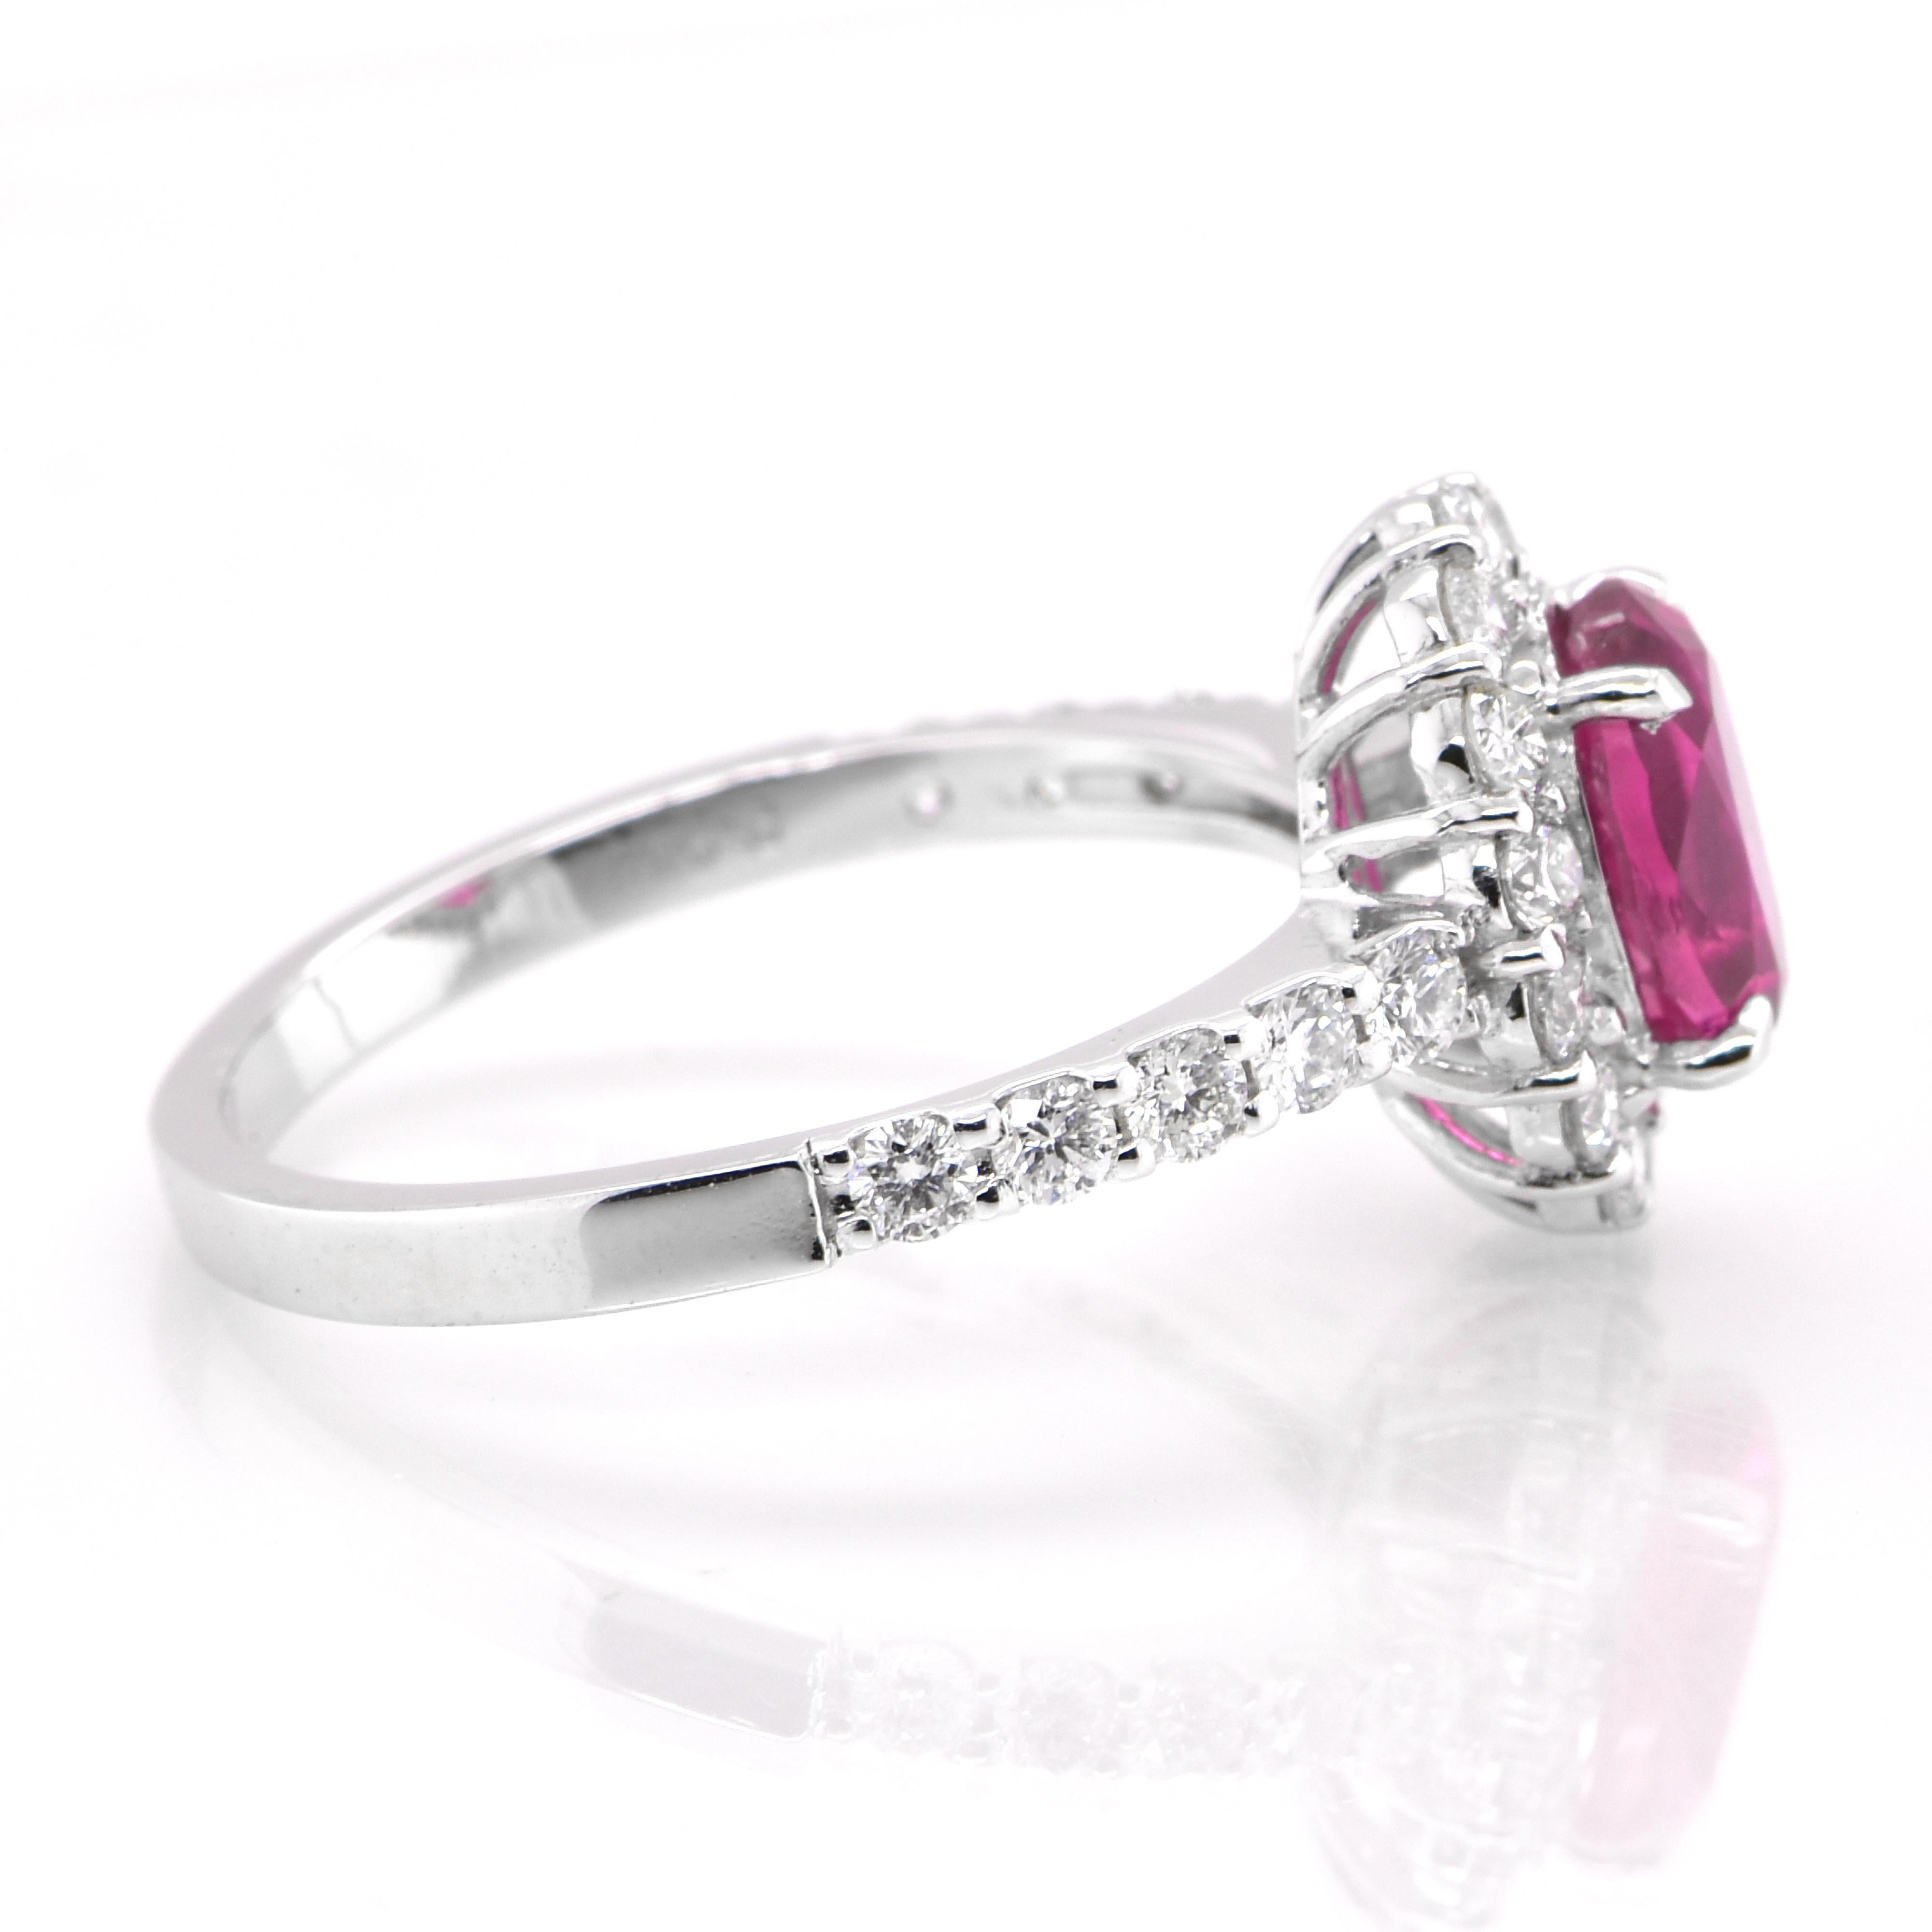 Oval Cut GIA Certified 1.58 Carat, Unheated, Burmese Ruby & Diamond Ring set in Platinum For Sale